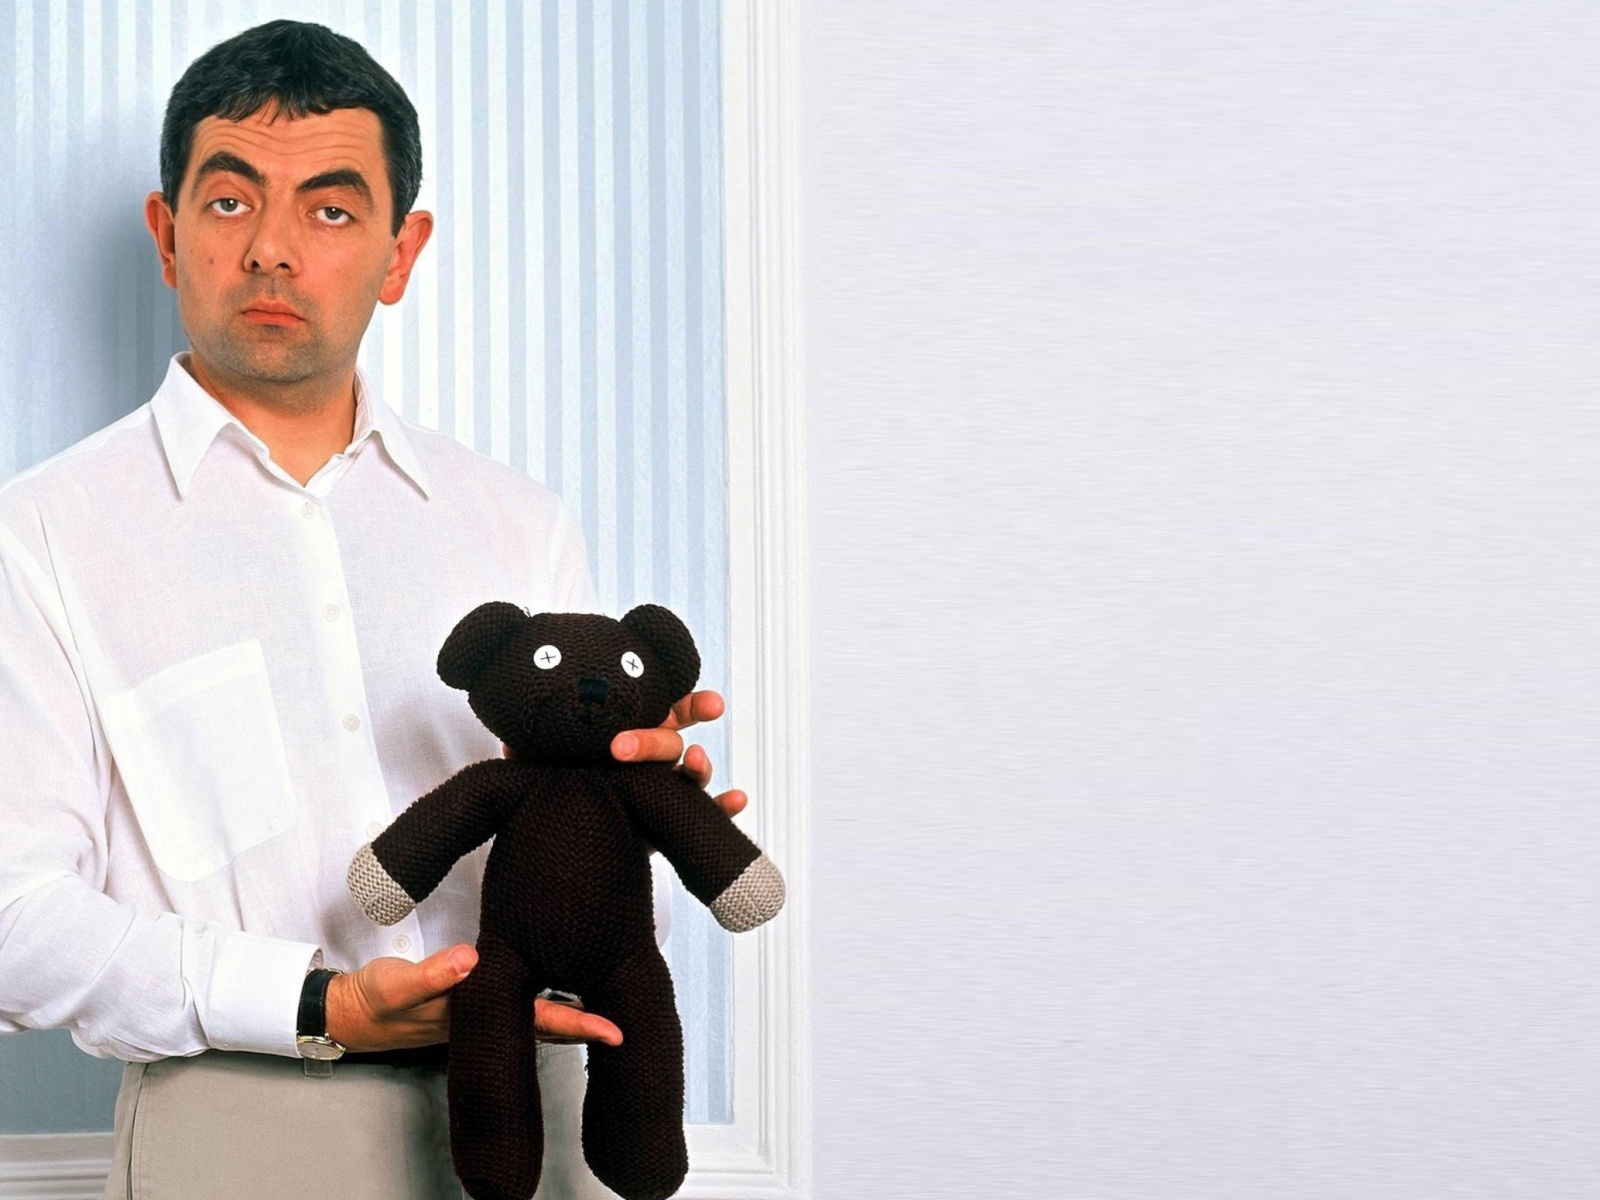 Mr Bean with Knitted Brown Teddy Bear wallpaper 1600x1200